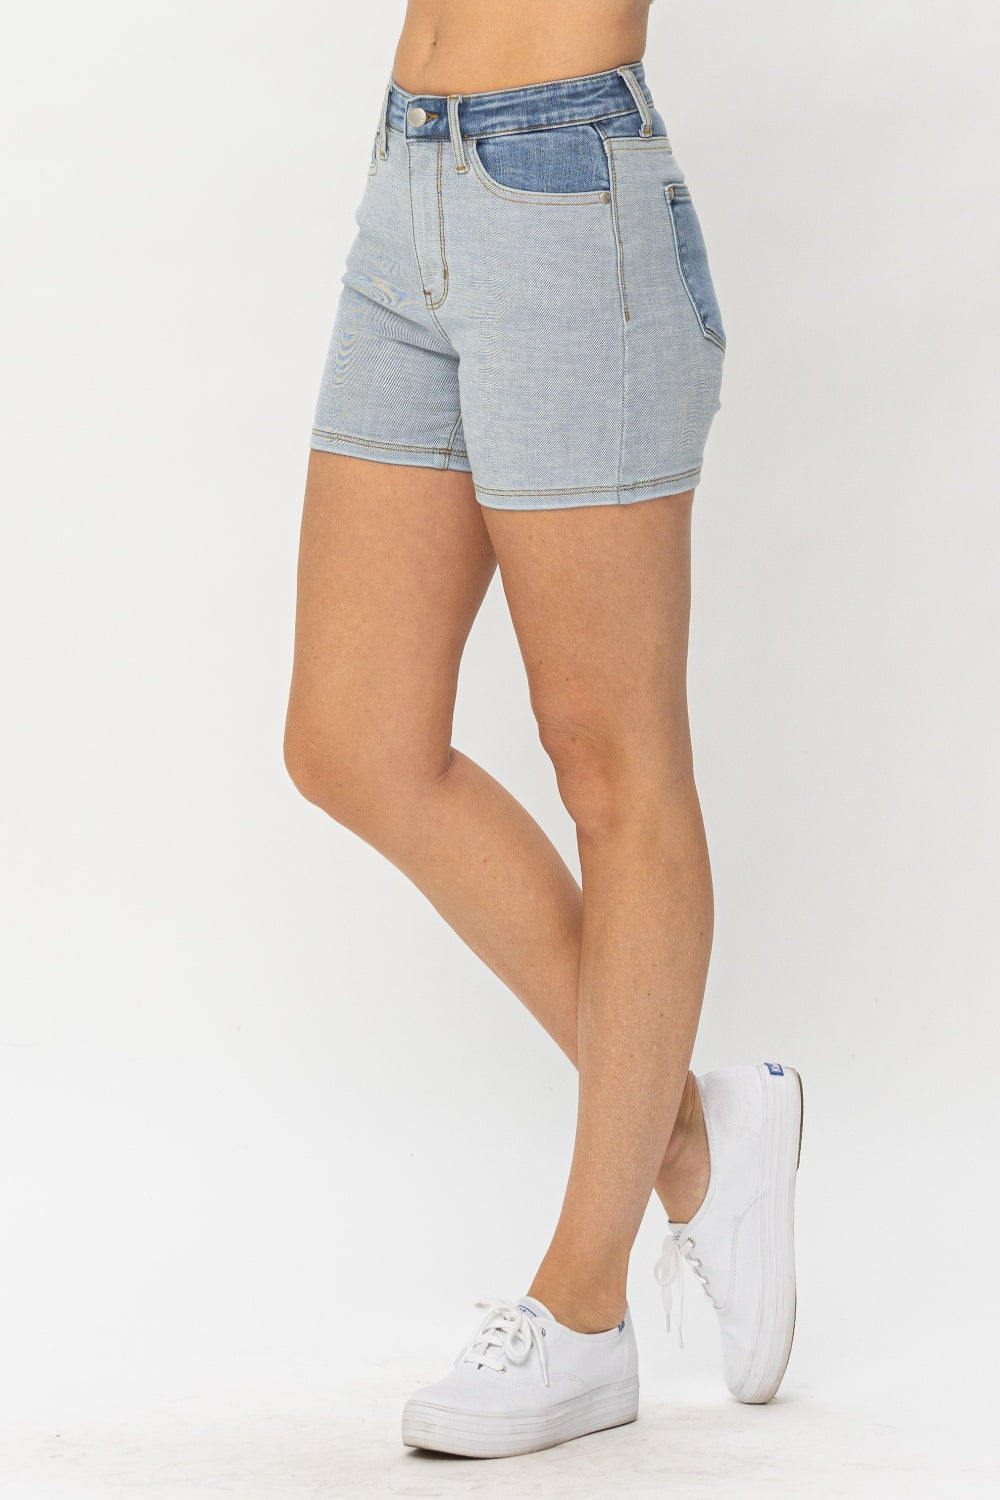 Judy Blue Full Size Color Block Denim Shorts-Denim-Inspired by Justeen-Women's Clothing Boutique in Chicago, Illinois